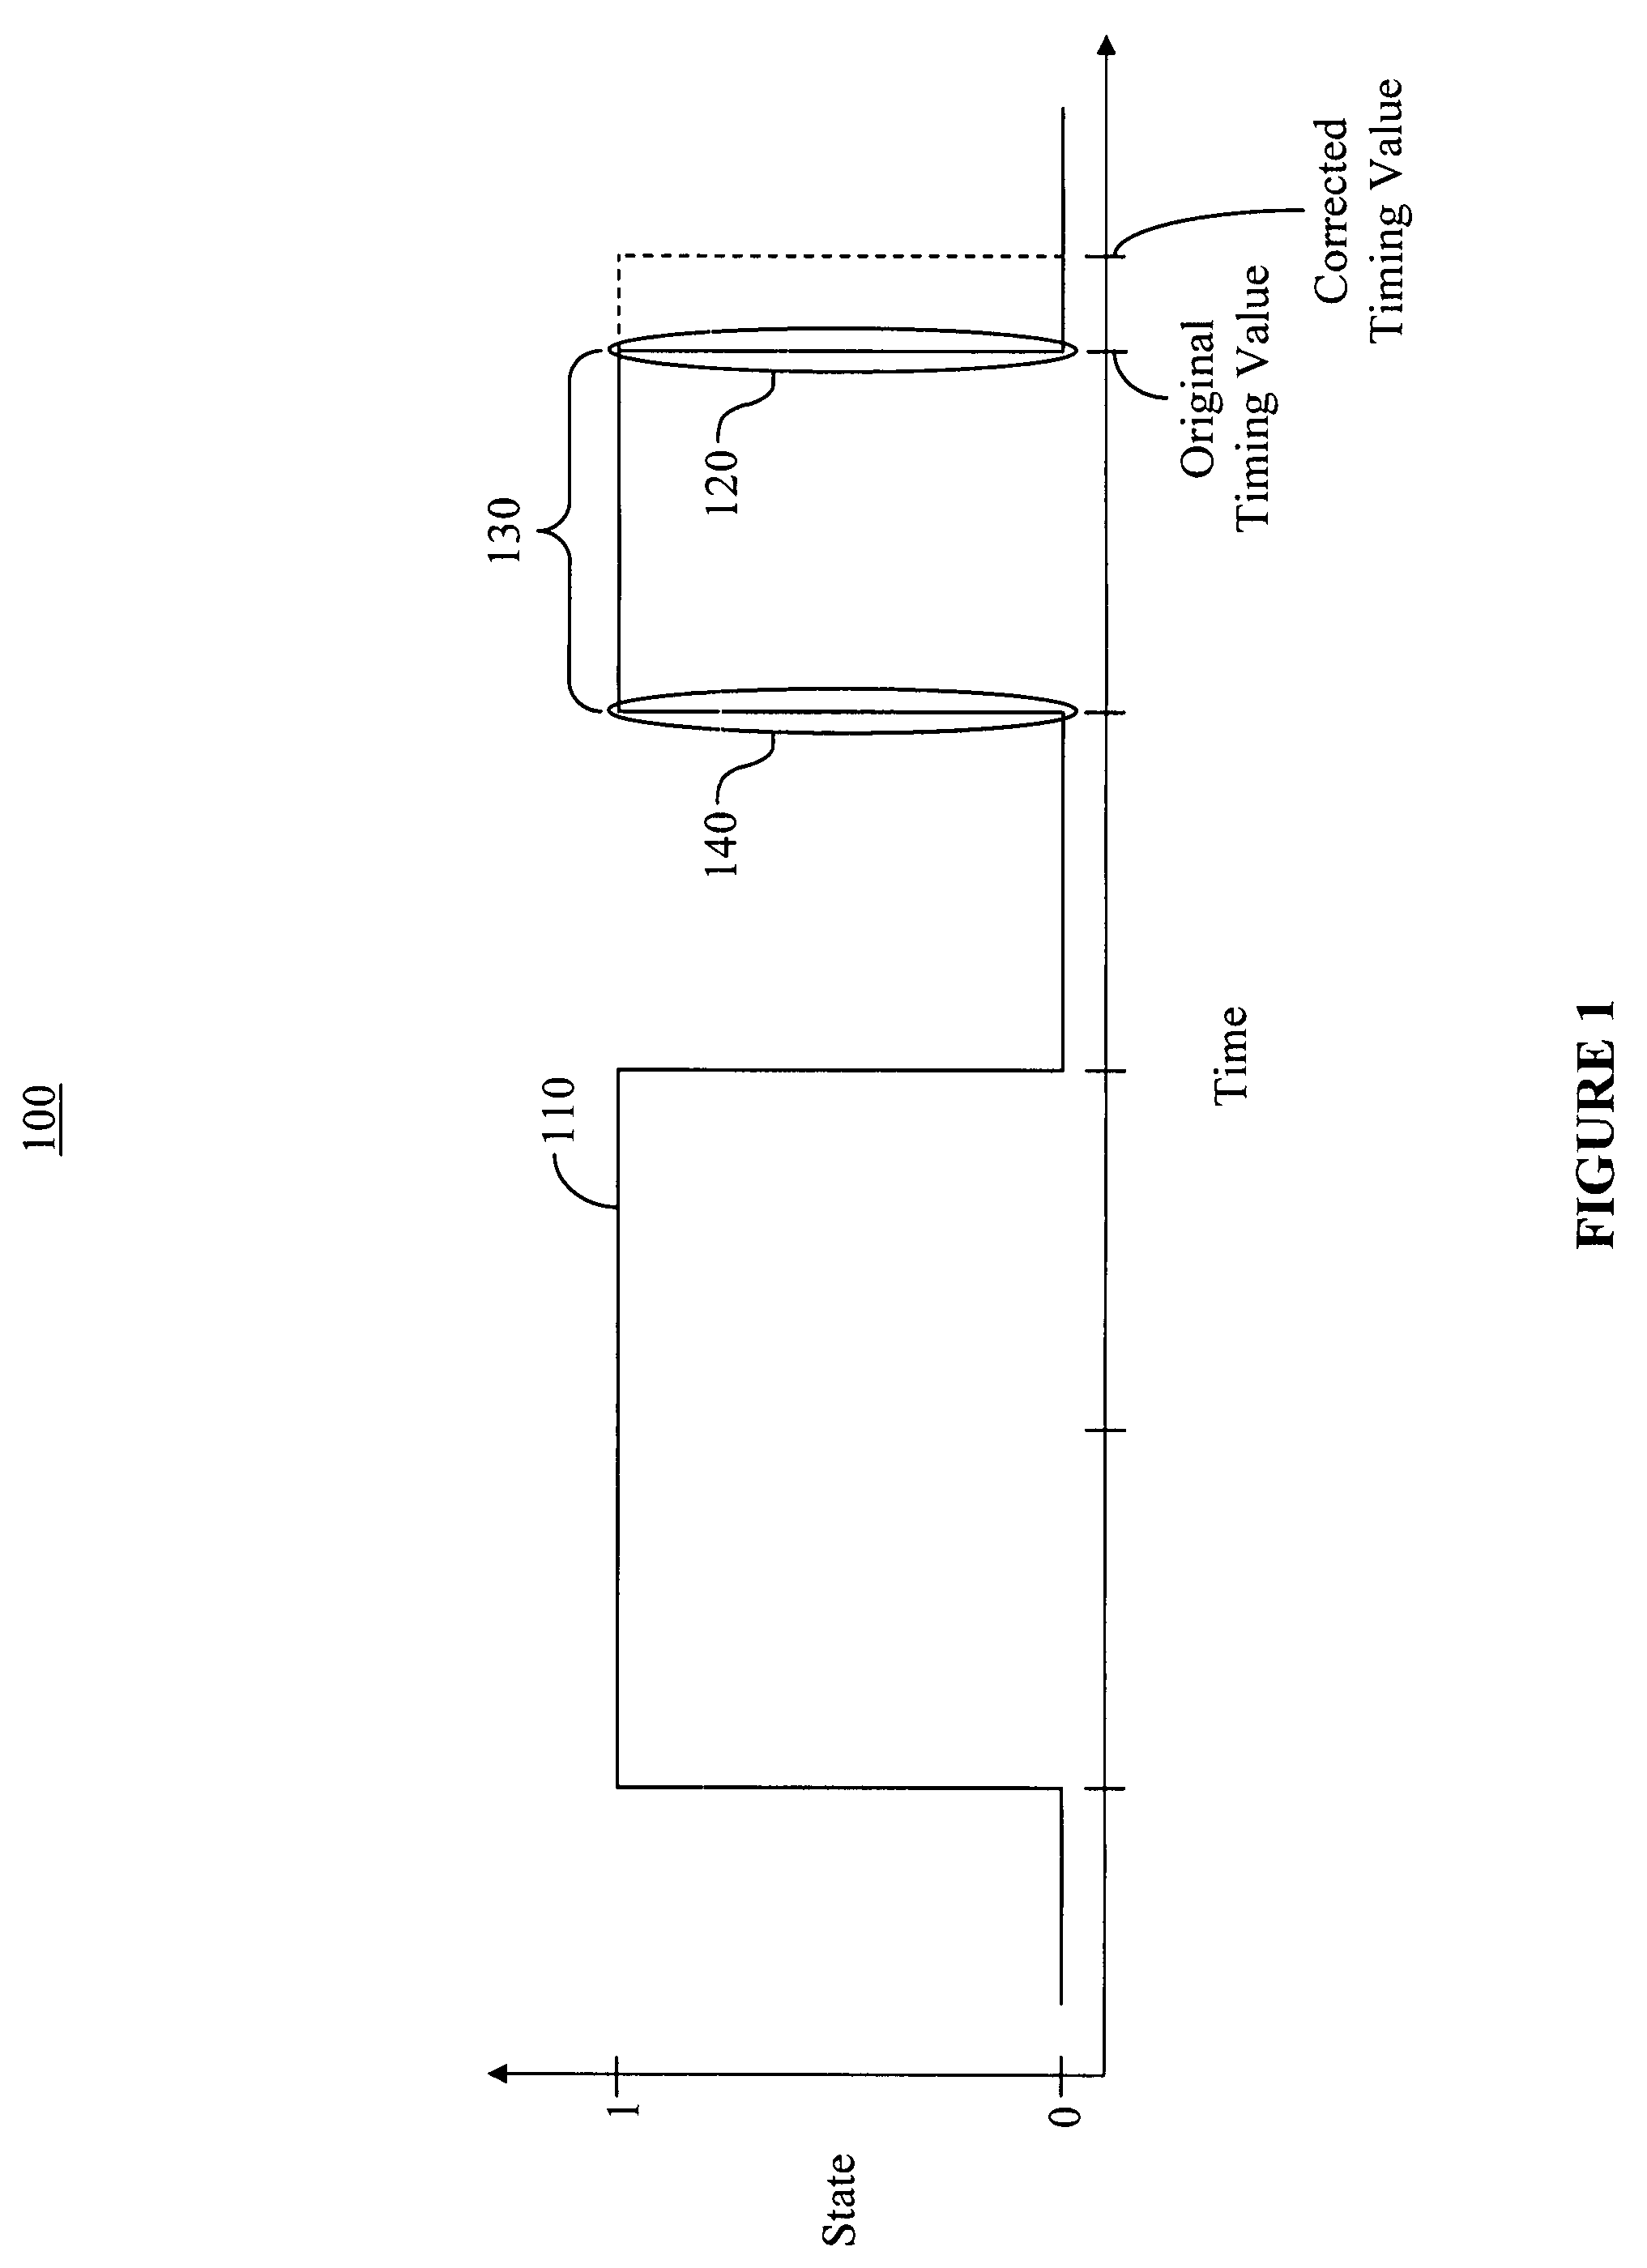 Method and system for correcting timing errors in high data rate automated test equipment